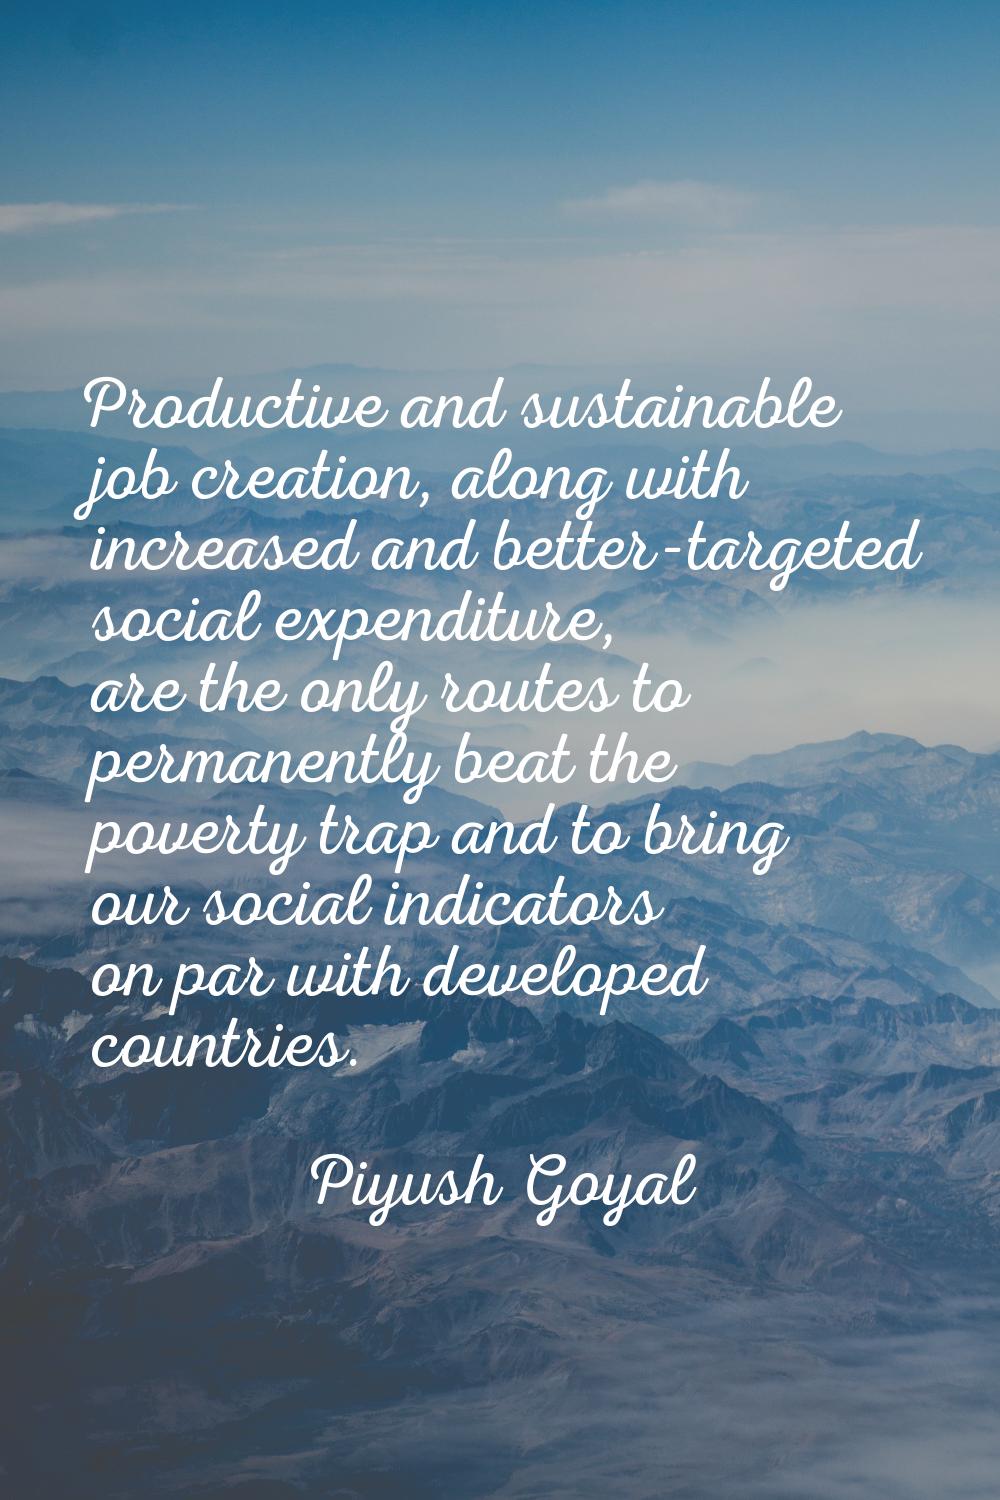 Productive and sustainable job creation, along with increased and better-targeted social expenditur